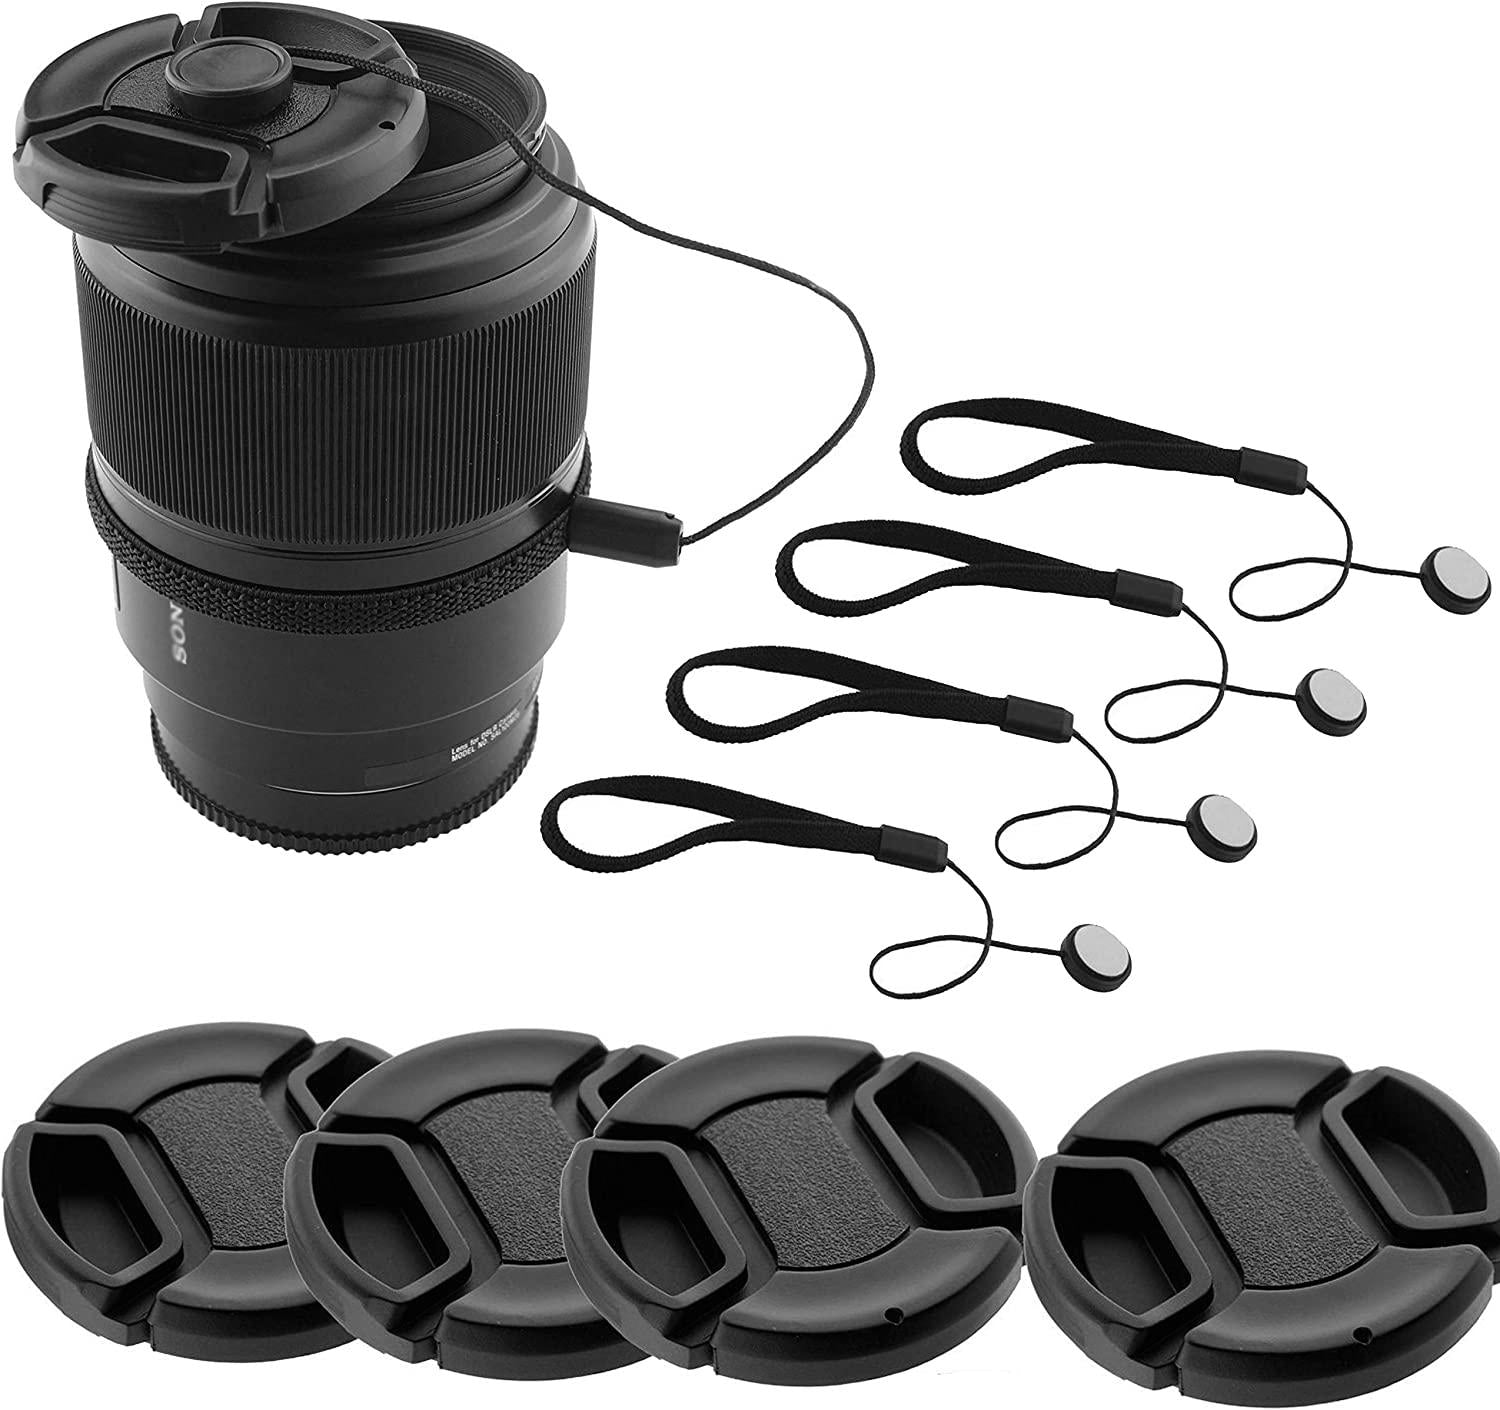 CamKix, Lens Cap Bundle - 4 Snap-on Lens Covers for DSLR Cameras Including Nikon, Canon, Sony - Lens Cap Keepers Included (58mm)